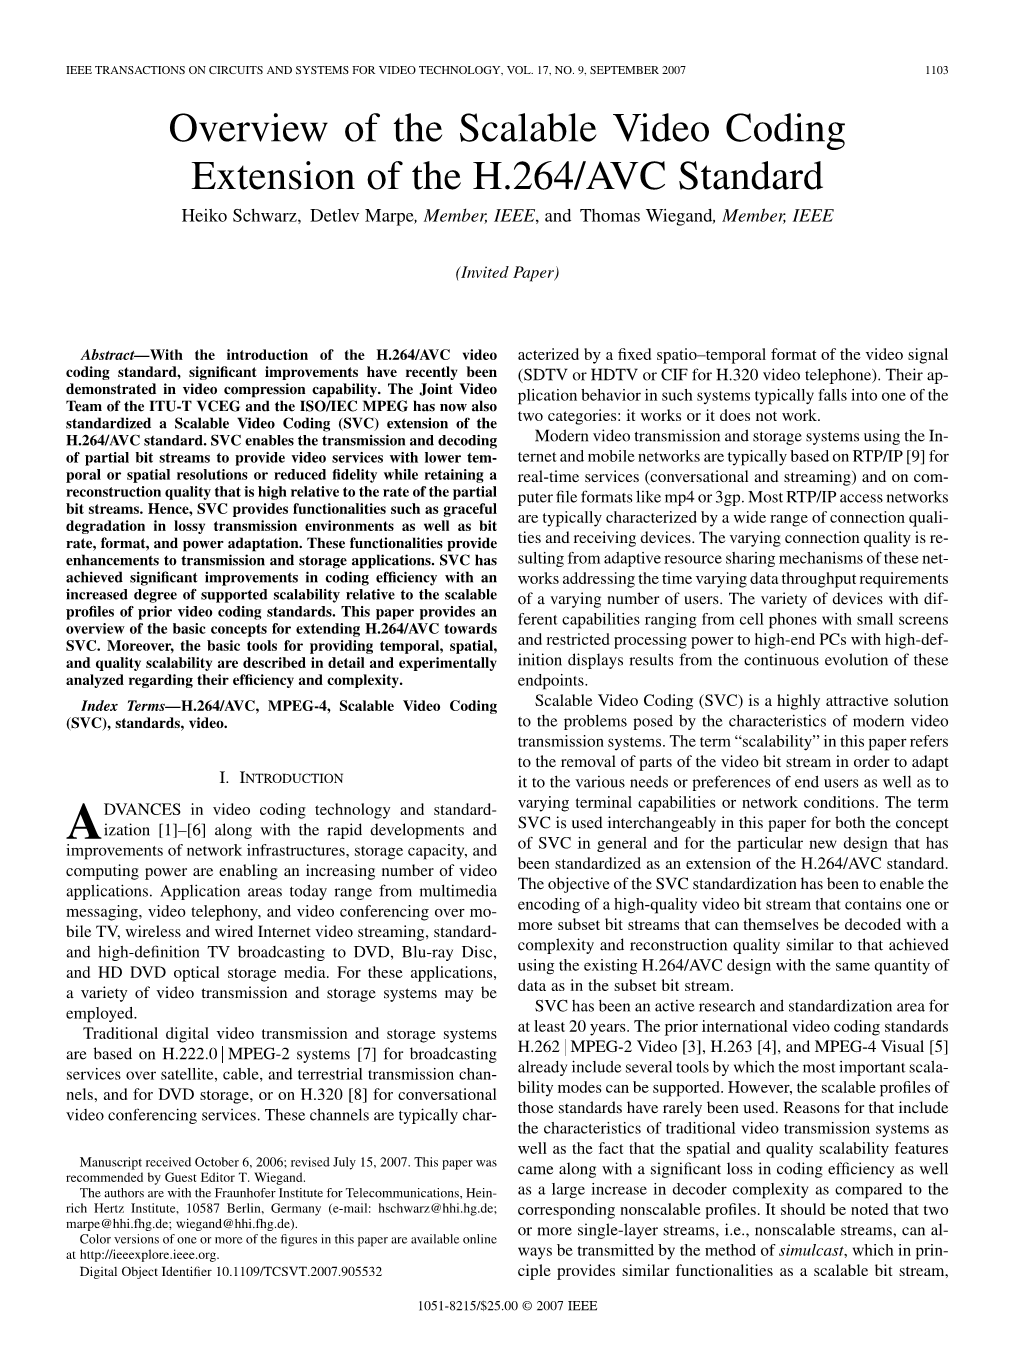 Overview of the Scalable Video Coding Extension of the H.264/AVC Standard Heiko Schwarz, Detlev Marpe, Member, IEEE, and Thomas Wiegand, Member, IEEE